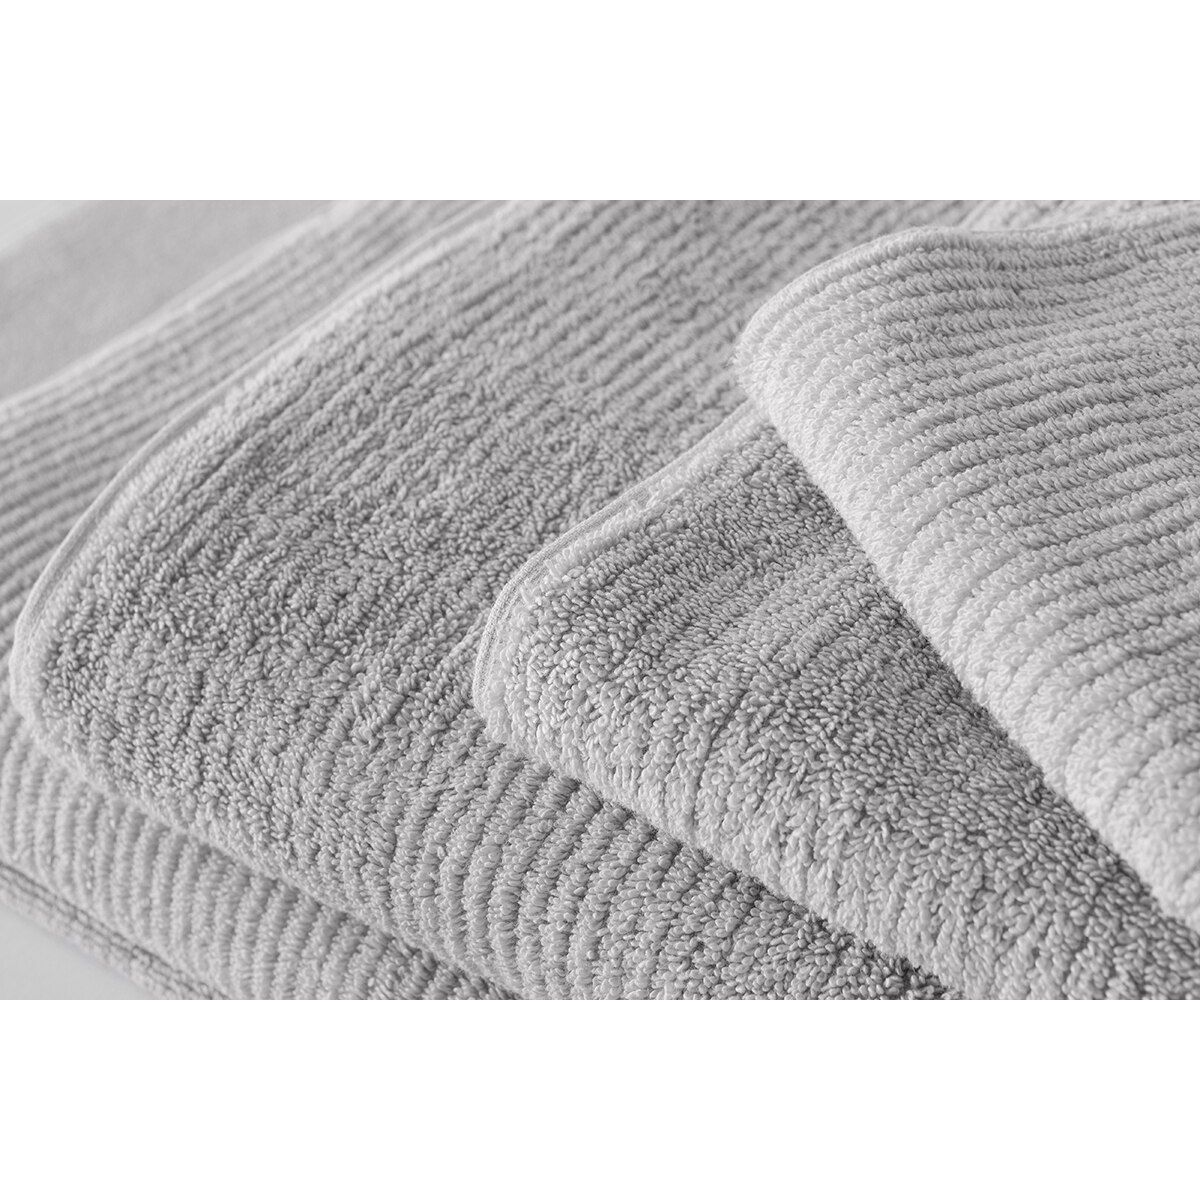 Living Textures Trenton Towel Collection by Sheridan SILVER GREY